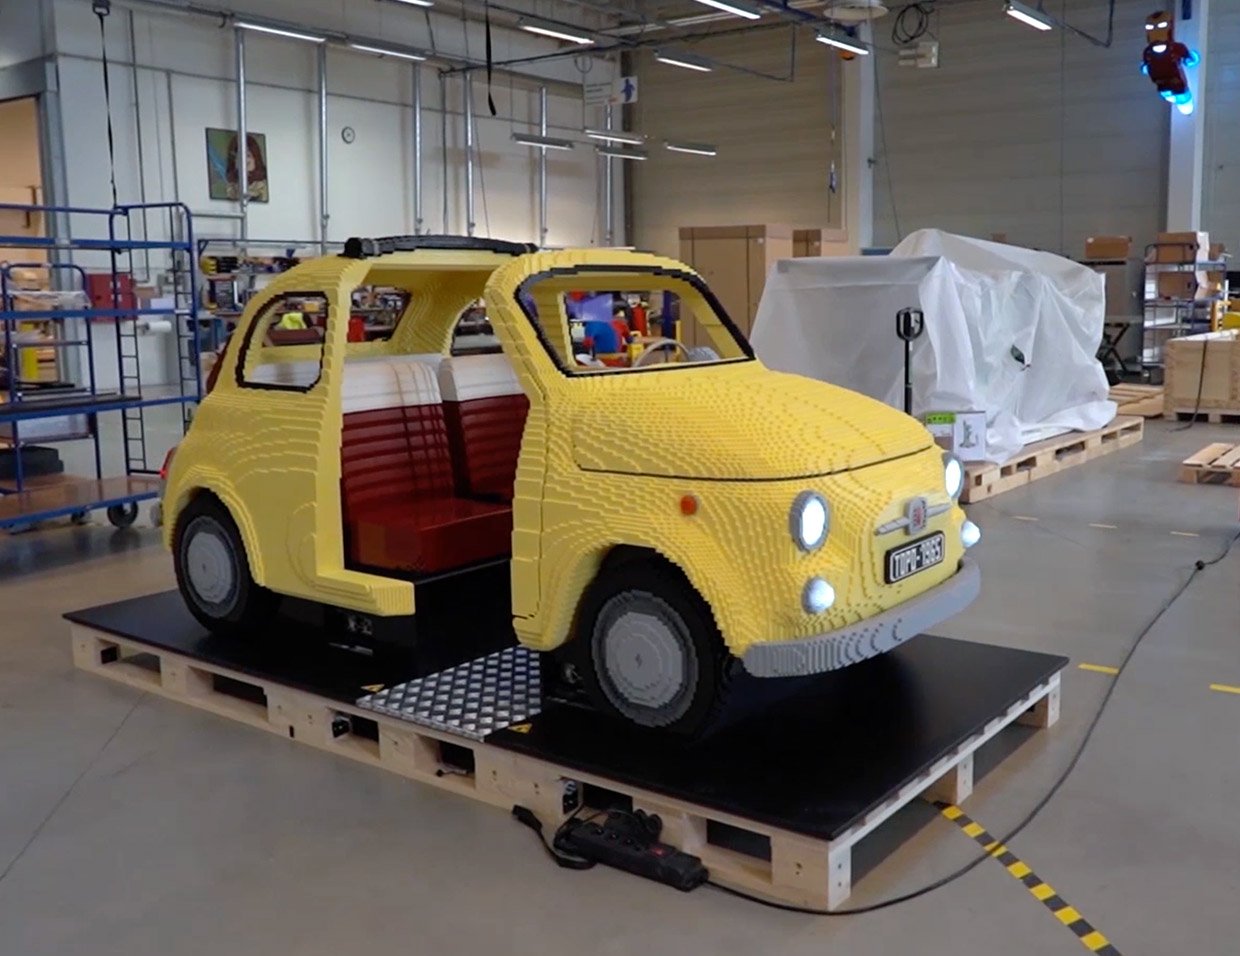 Fiat and LEGO Built a Life-size Fiat 500